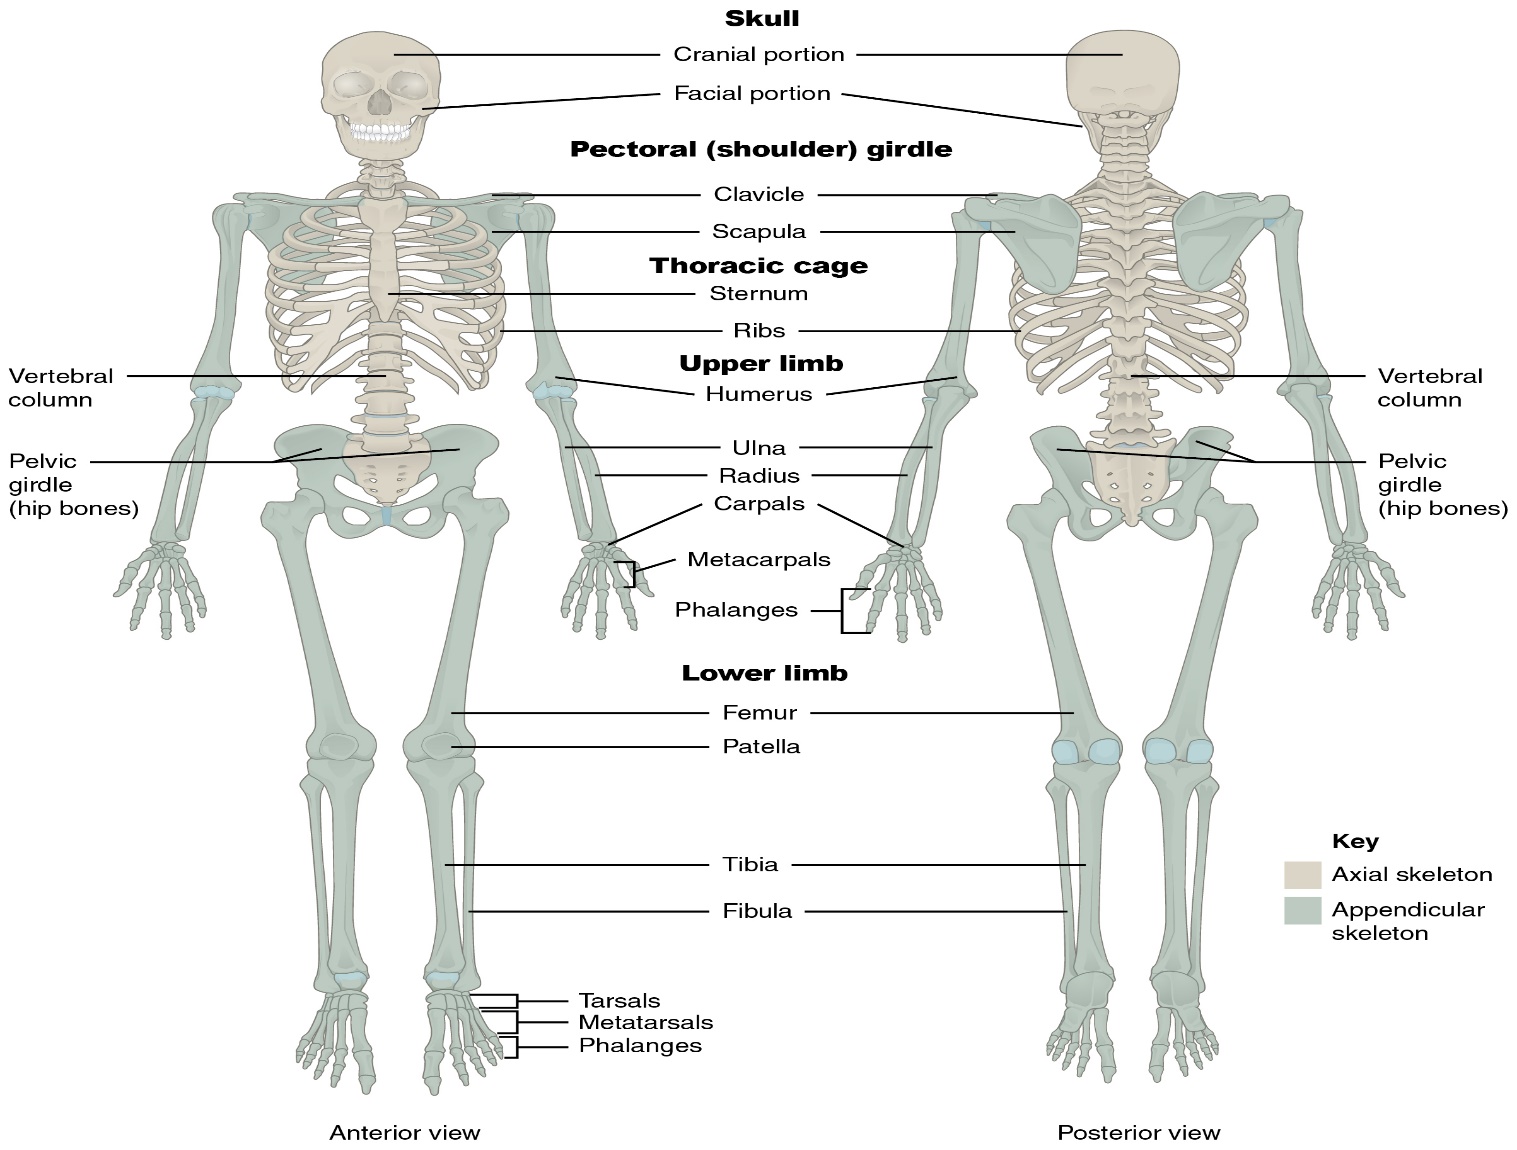 The axial skeleton consists of the skull, vertebral column, and the thoracic cage. The appendicular skeleton is made up of all bones of the upper and lower limbs.